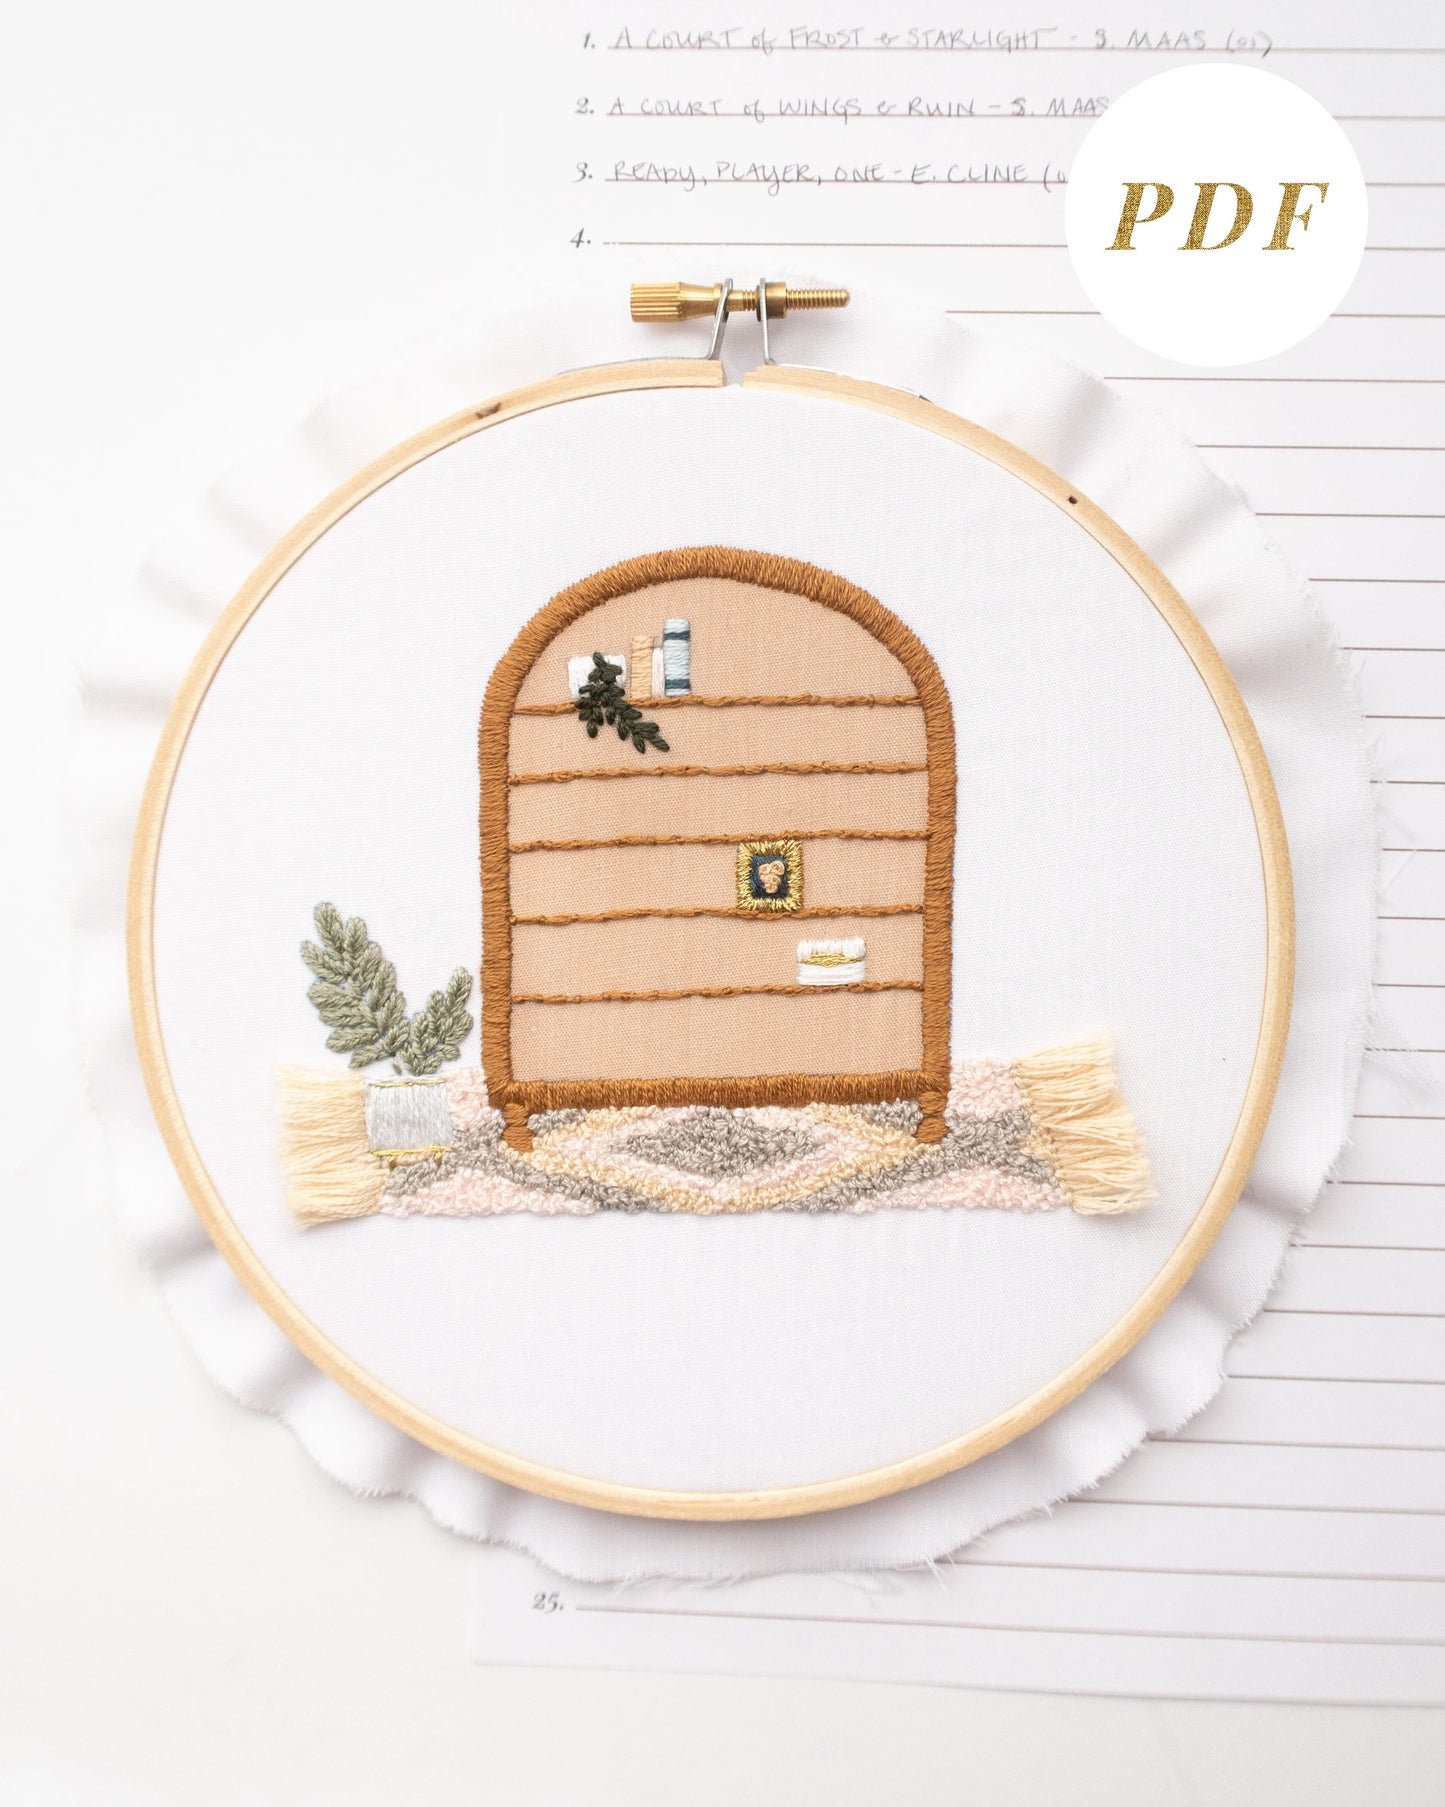 Free hand embroidery book tracker with bookshelf and boho rug with tassels and book rating sheet